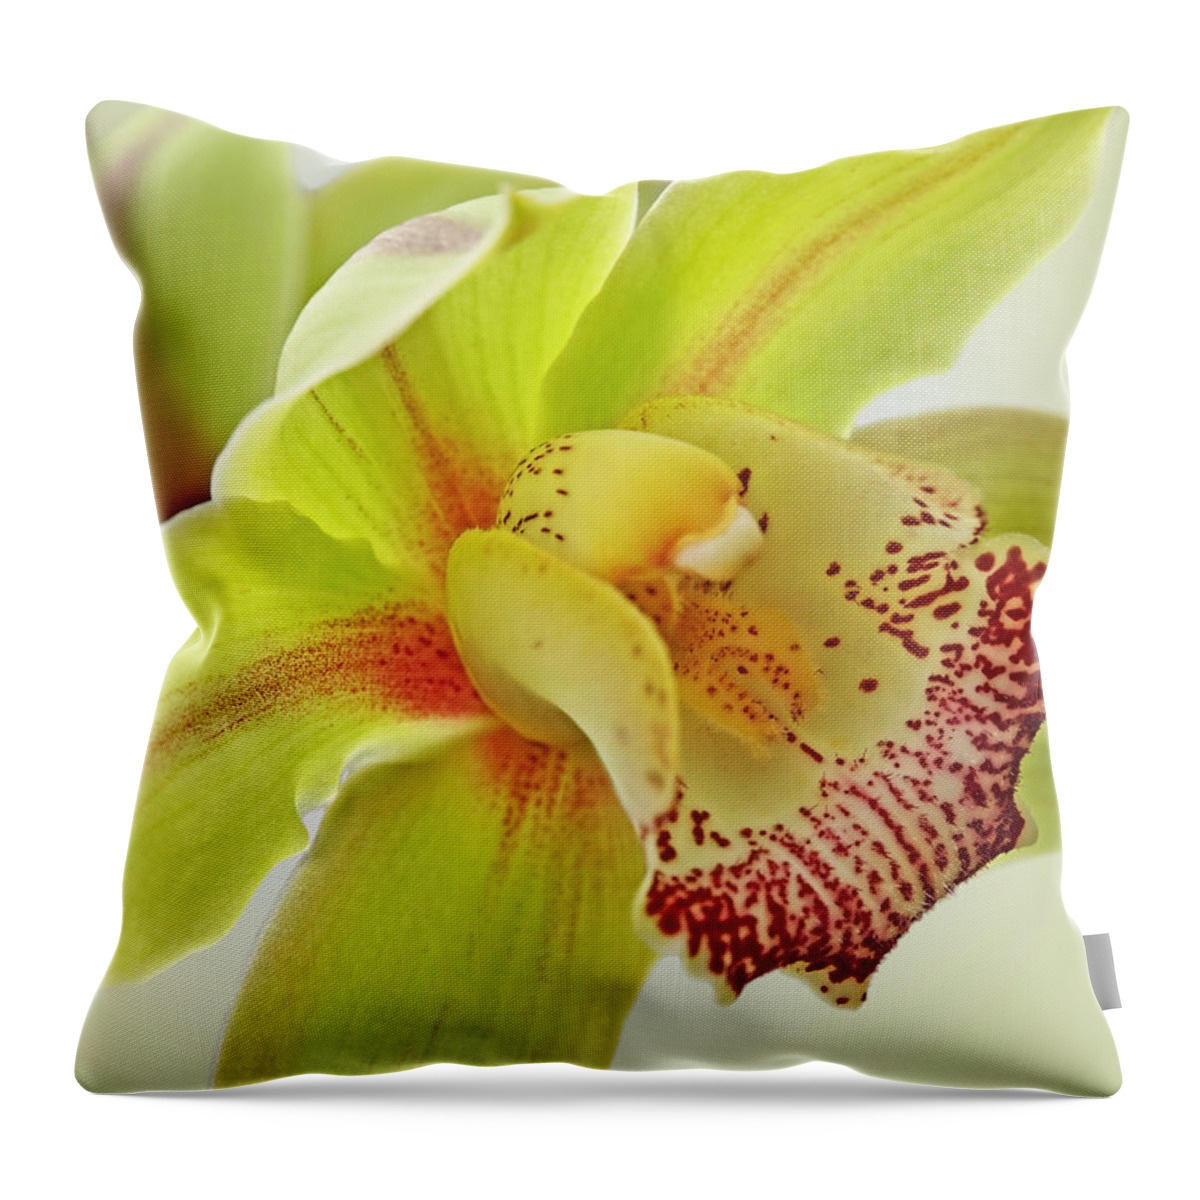 Yellow Orchid Throw Pillow featuring the photograph Fresh Green Cymbidium Orchid by Gill Billington